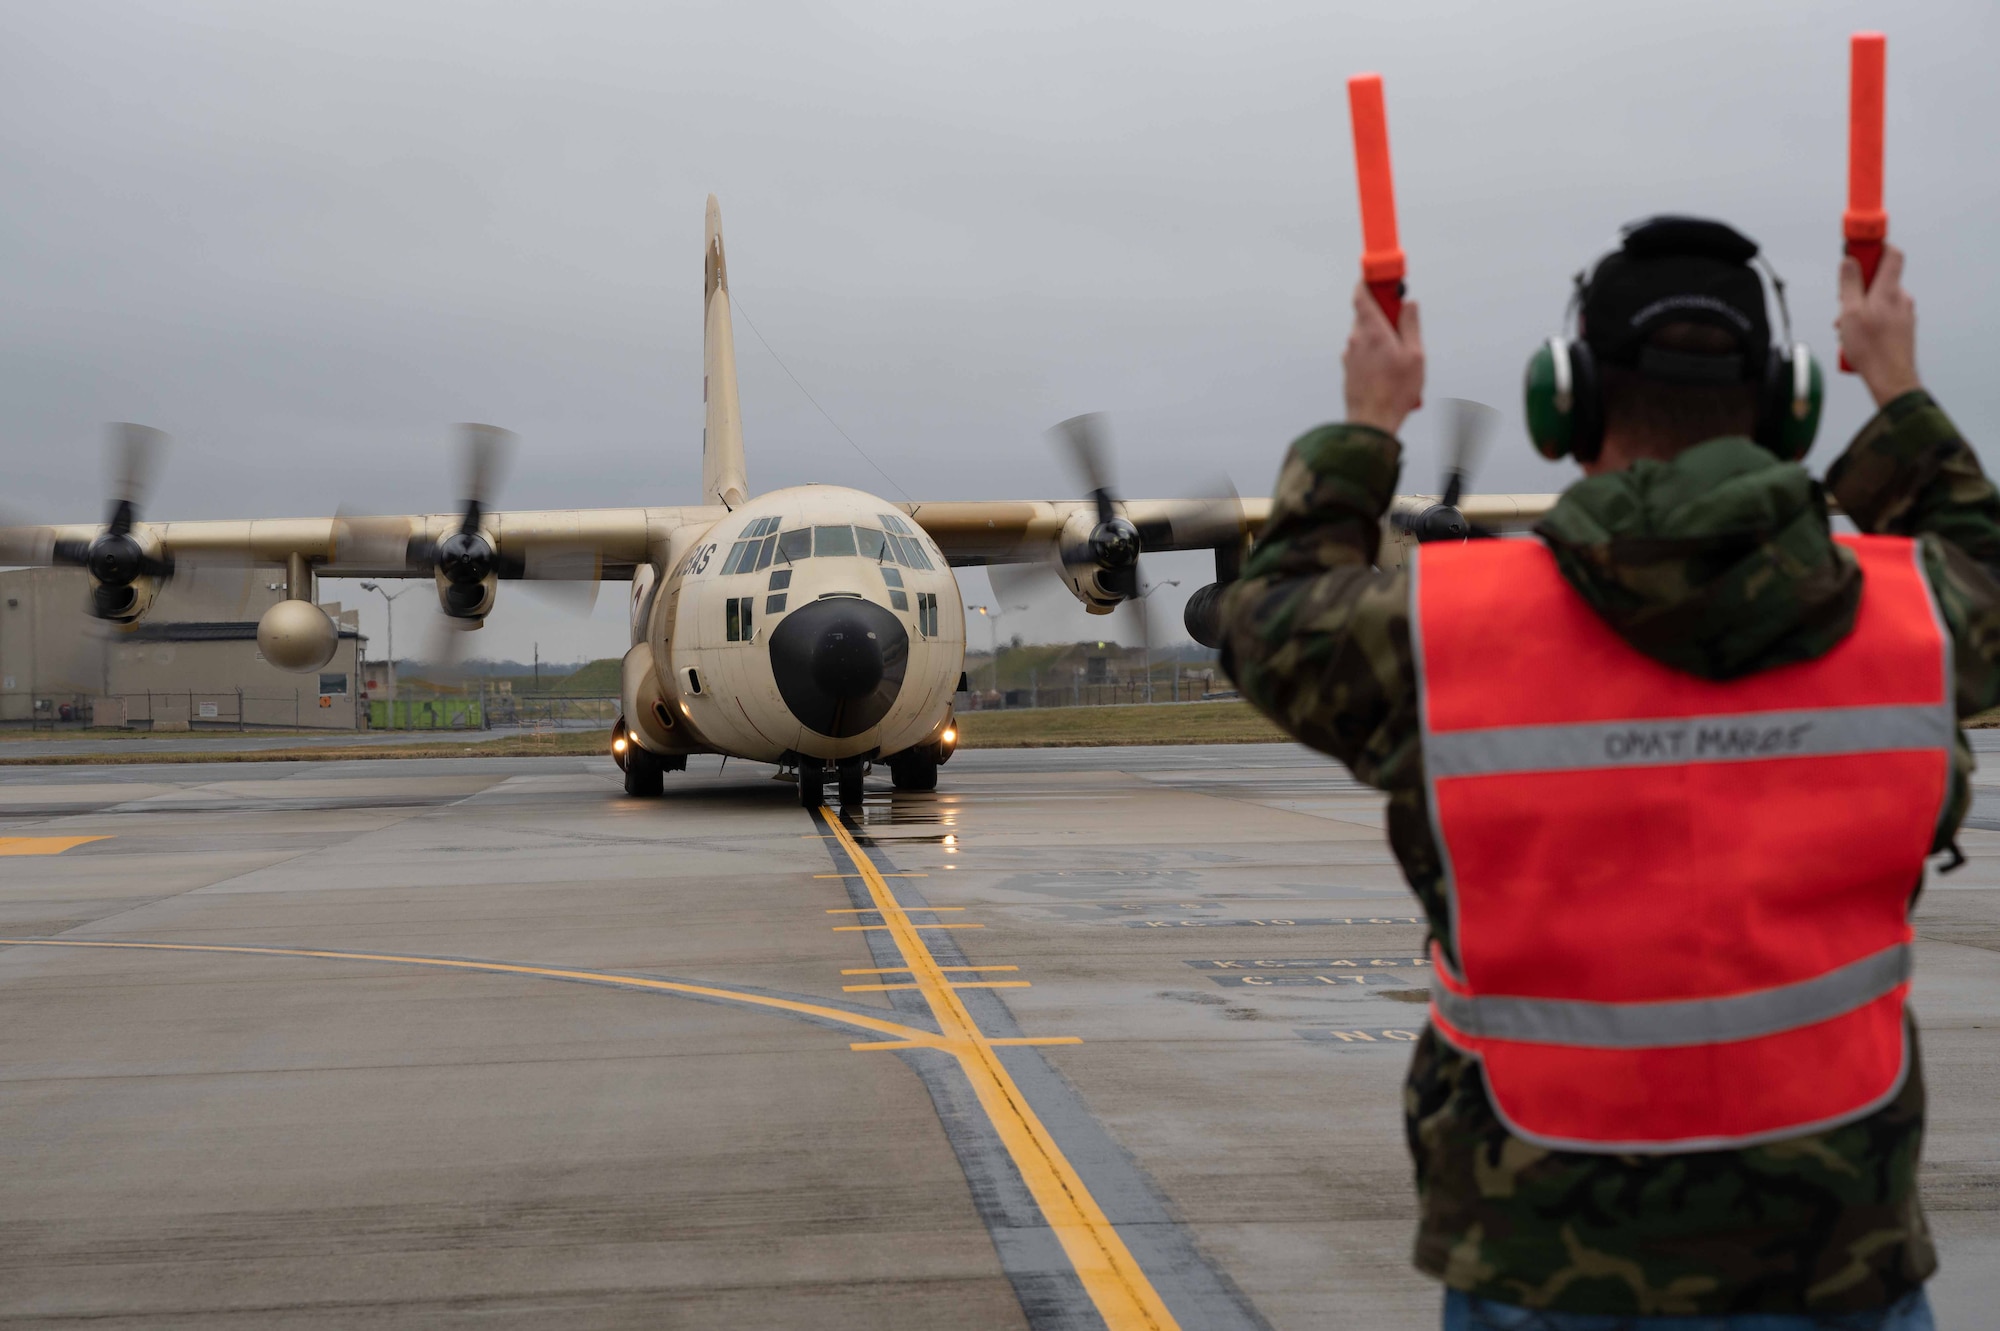 A member of the 436th Aircraft Maintenance Squadron transient alert marshals an Egyptian Air Force C-130 Hercules during a foreign military sales mission at Dover Air Force Base, Delaware, Dec. 11, 2021. The United States and Egypt share a strong partnership based on mutual interest in Middle East peace and stability, economic opportunity and regional security. Due to its strategic location, Dover AFB supports approximately $3.5 billion worth of foreign military sales annually. (U.S. Air Force photo by Senior Airman Faith Schaefer)